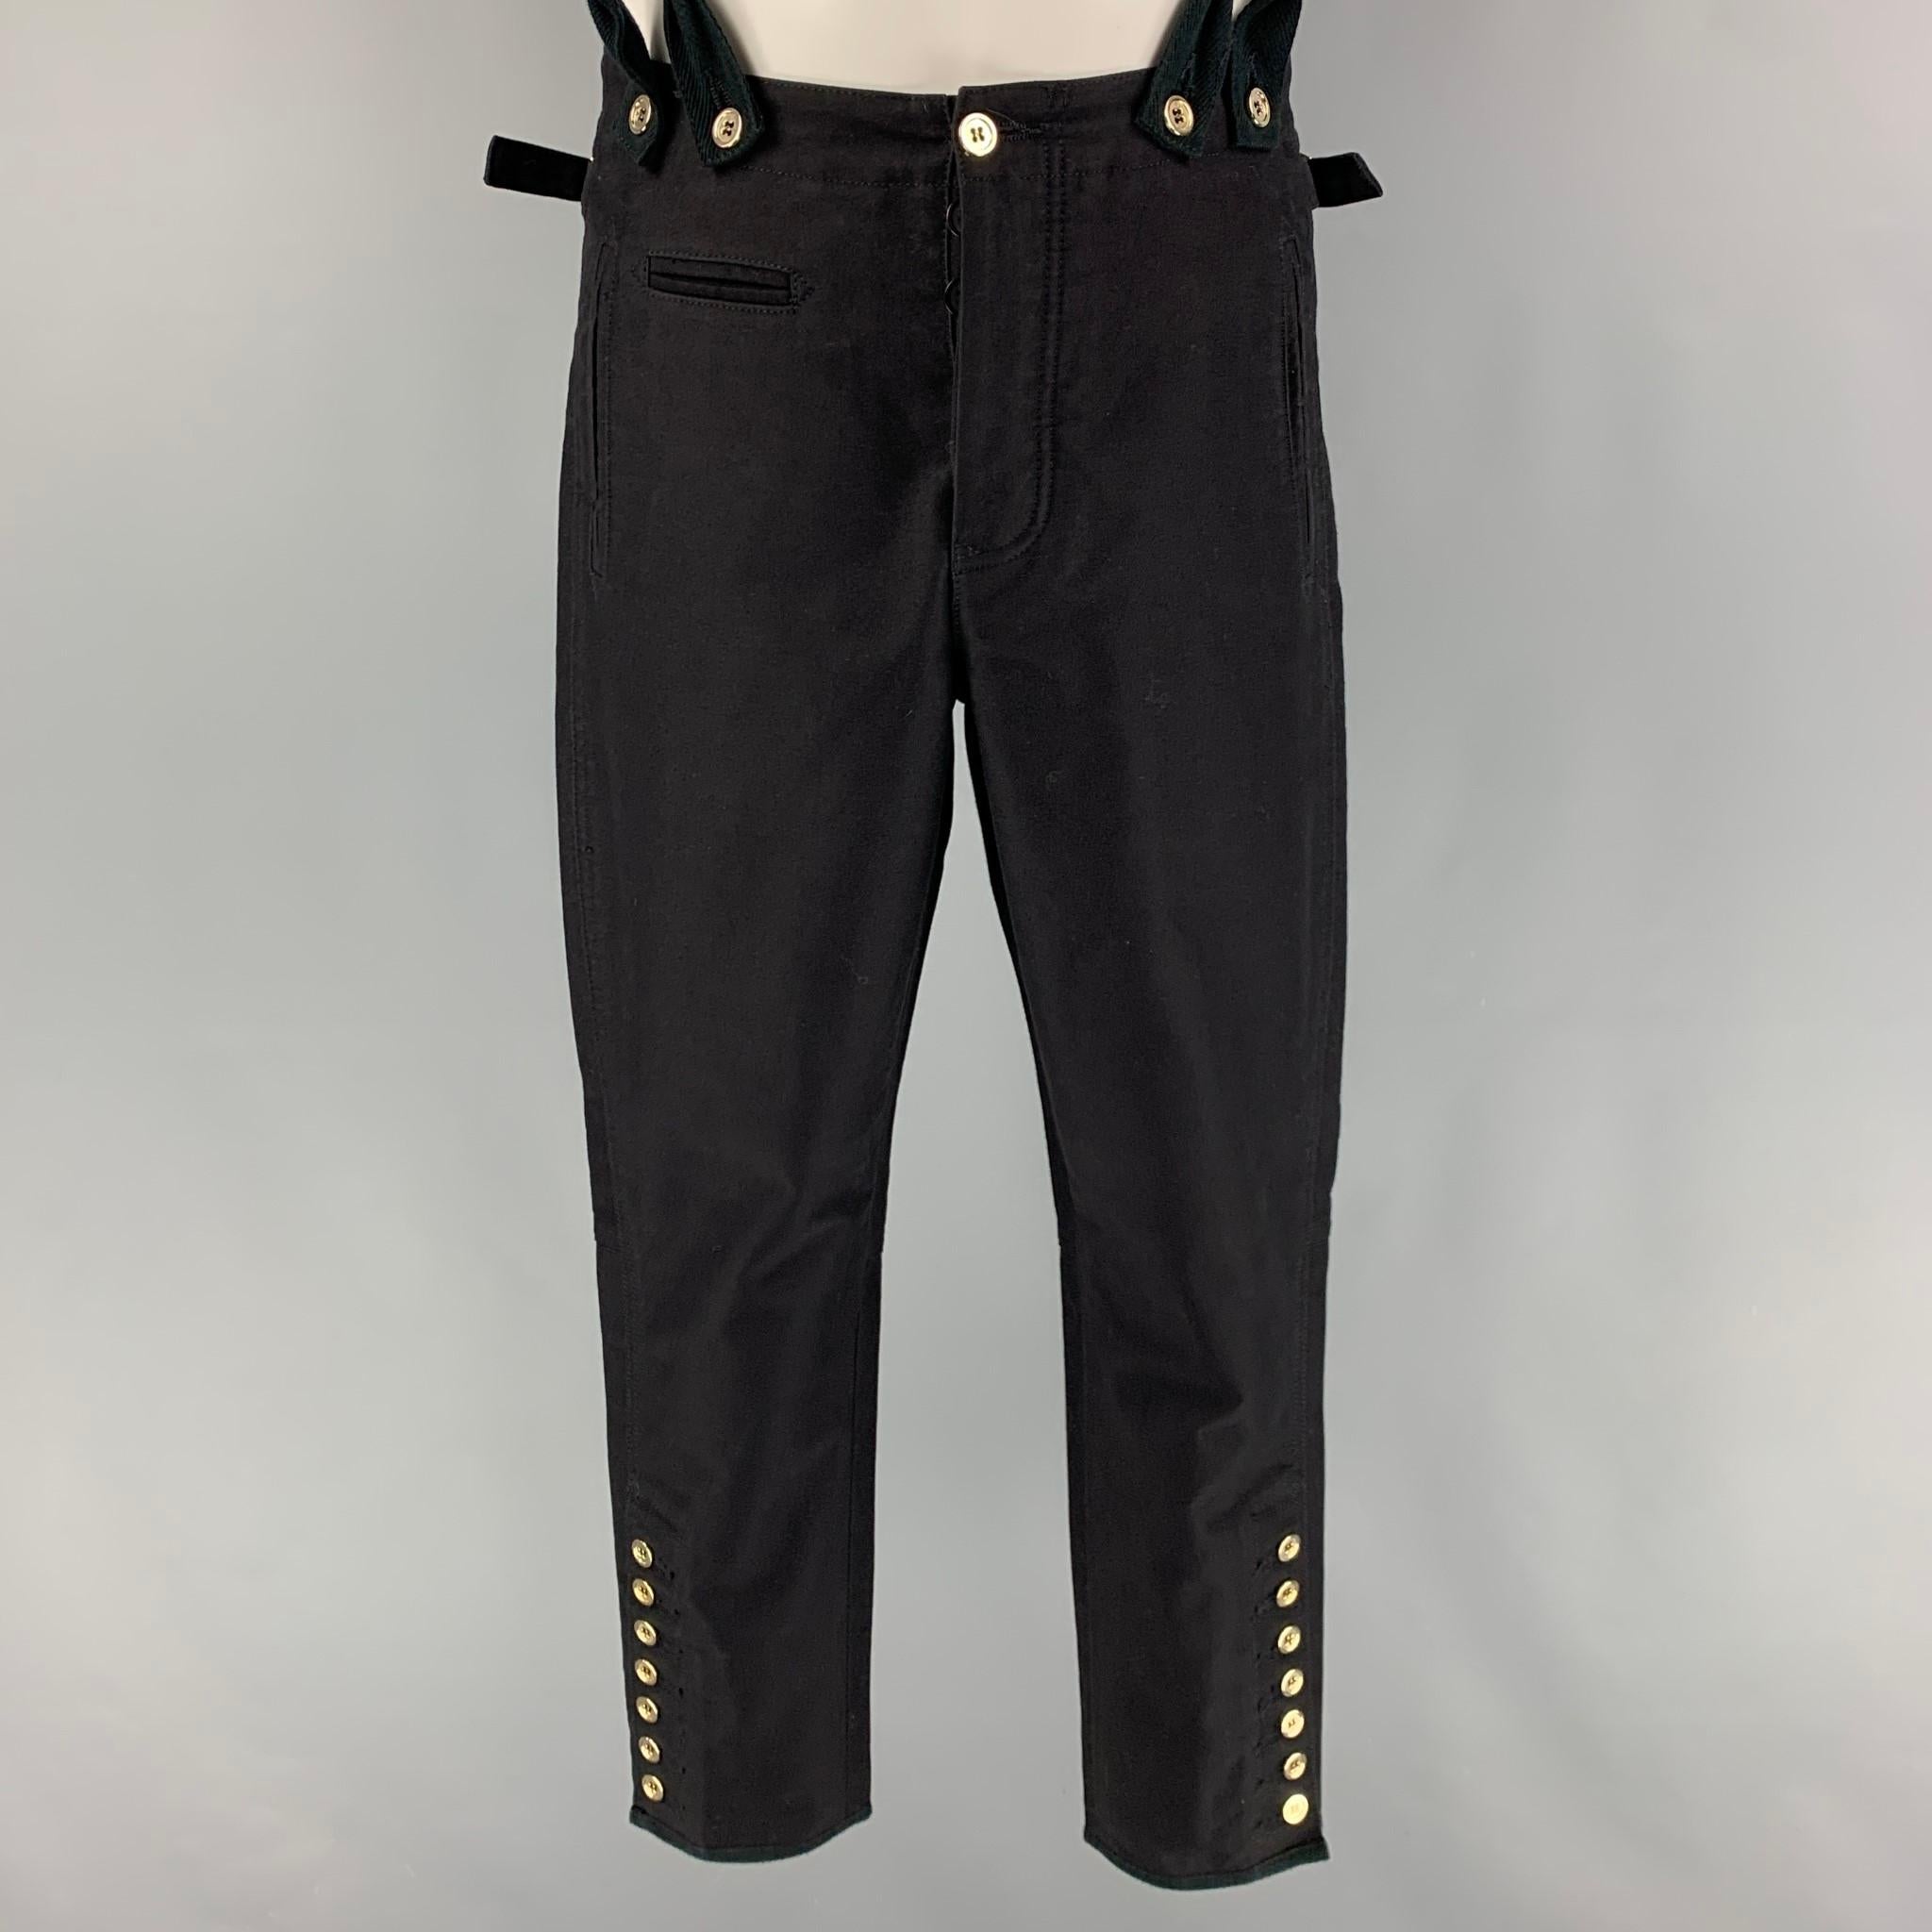 BALMAIN pants comes in a black cotton featuring a jodhpurs style, gold tone buttons, suspenders buttons, side tabs, adjustable suspenders, and a button fly closure. Made in Italy. 

Very Good Pre-Owned Condition.
Marked: S

Measurements:

Waist: 28